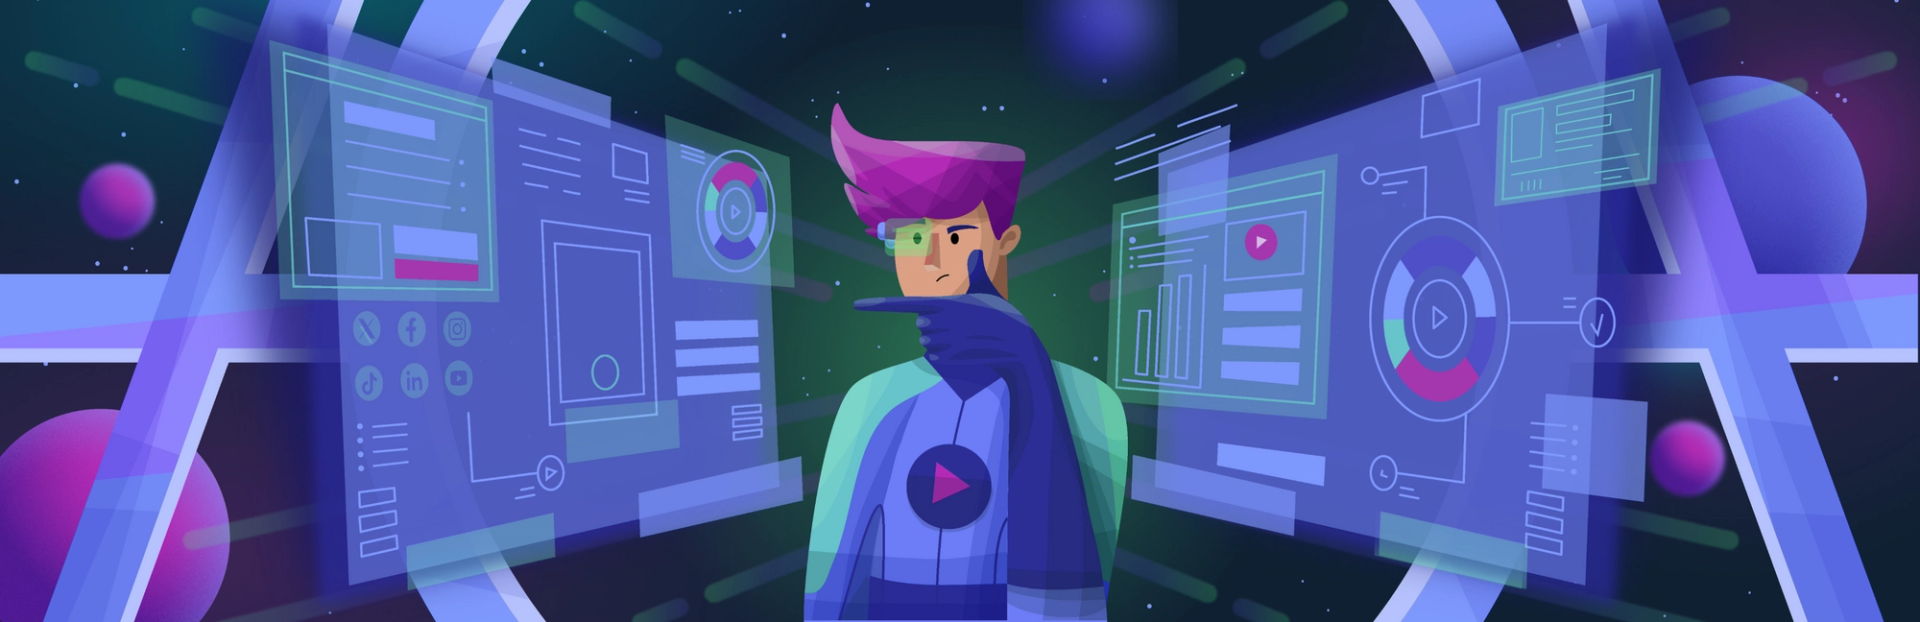 Character in space surrounded by screens with graphs